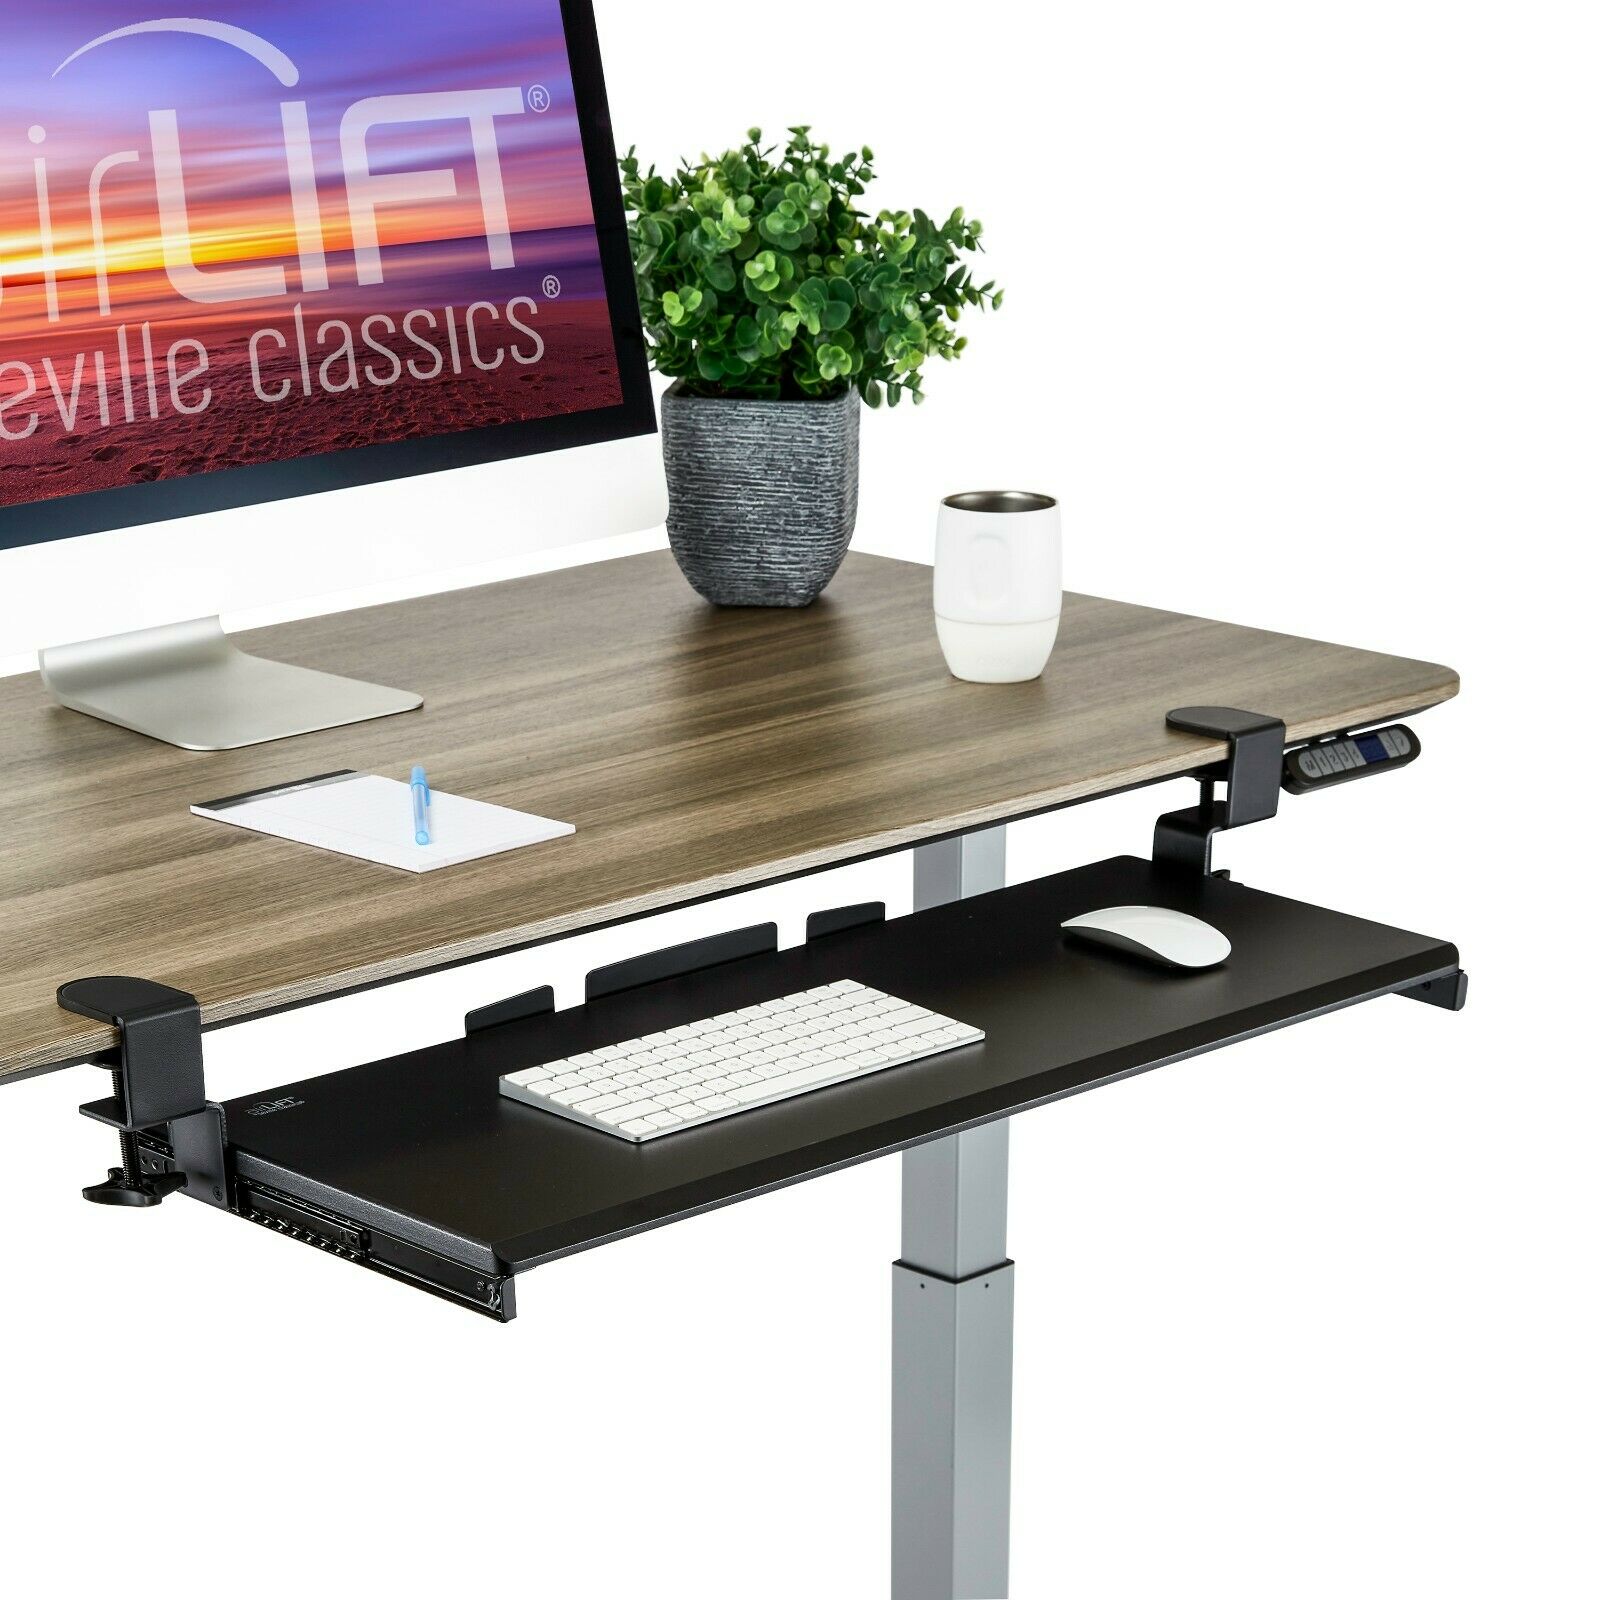 Seville Classics Airlift Clamp-on Keyboard Tray 31.5" W X 11" D Extra Large